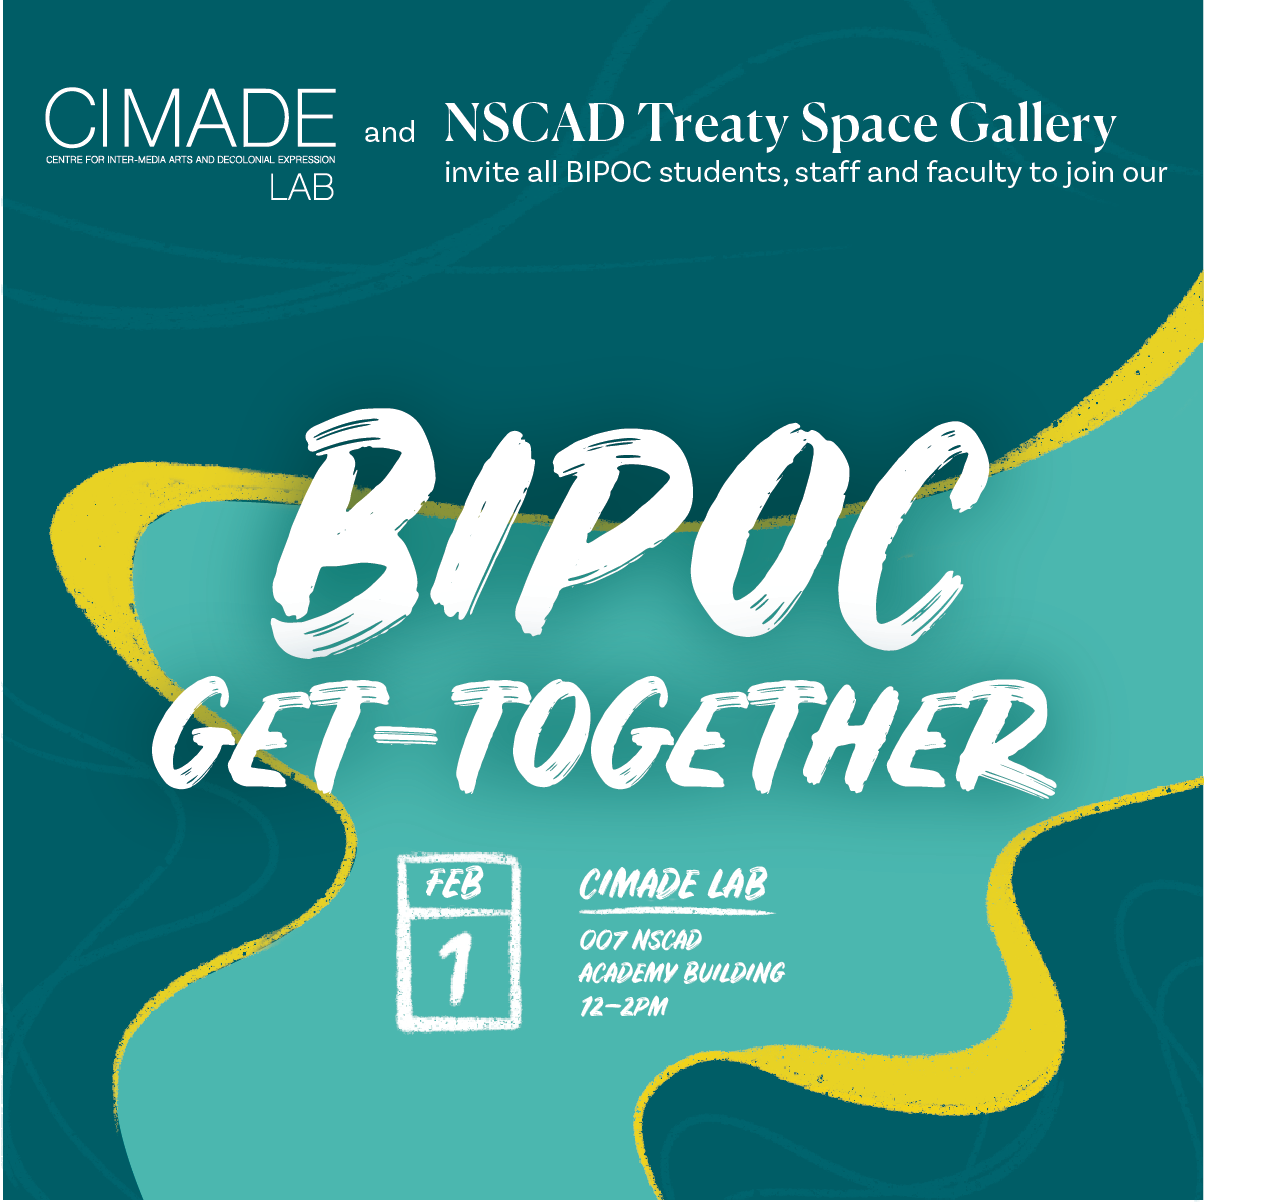 Dark and light teal background with text reading "CiMADE Lab and NSCAD Treaty Space Gallery invite all BIPOC students, staff and faculty to join our BIPOC Get-Together. Feb 1 CiMADE Lab 007 NSCAD Academy Building 12–2PM"